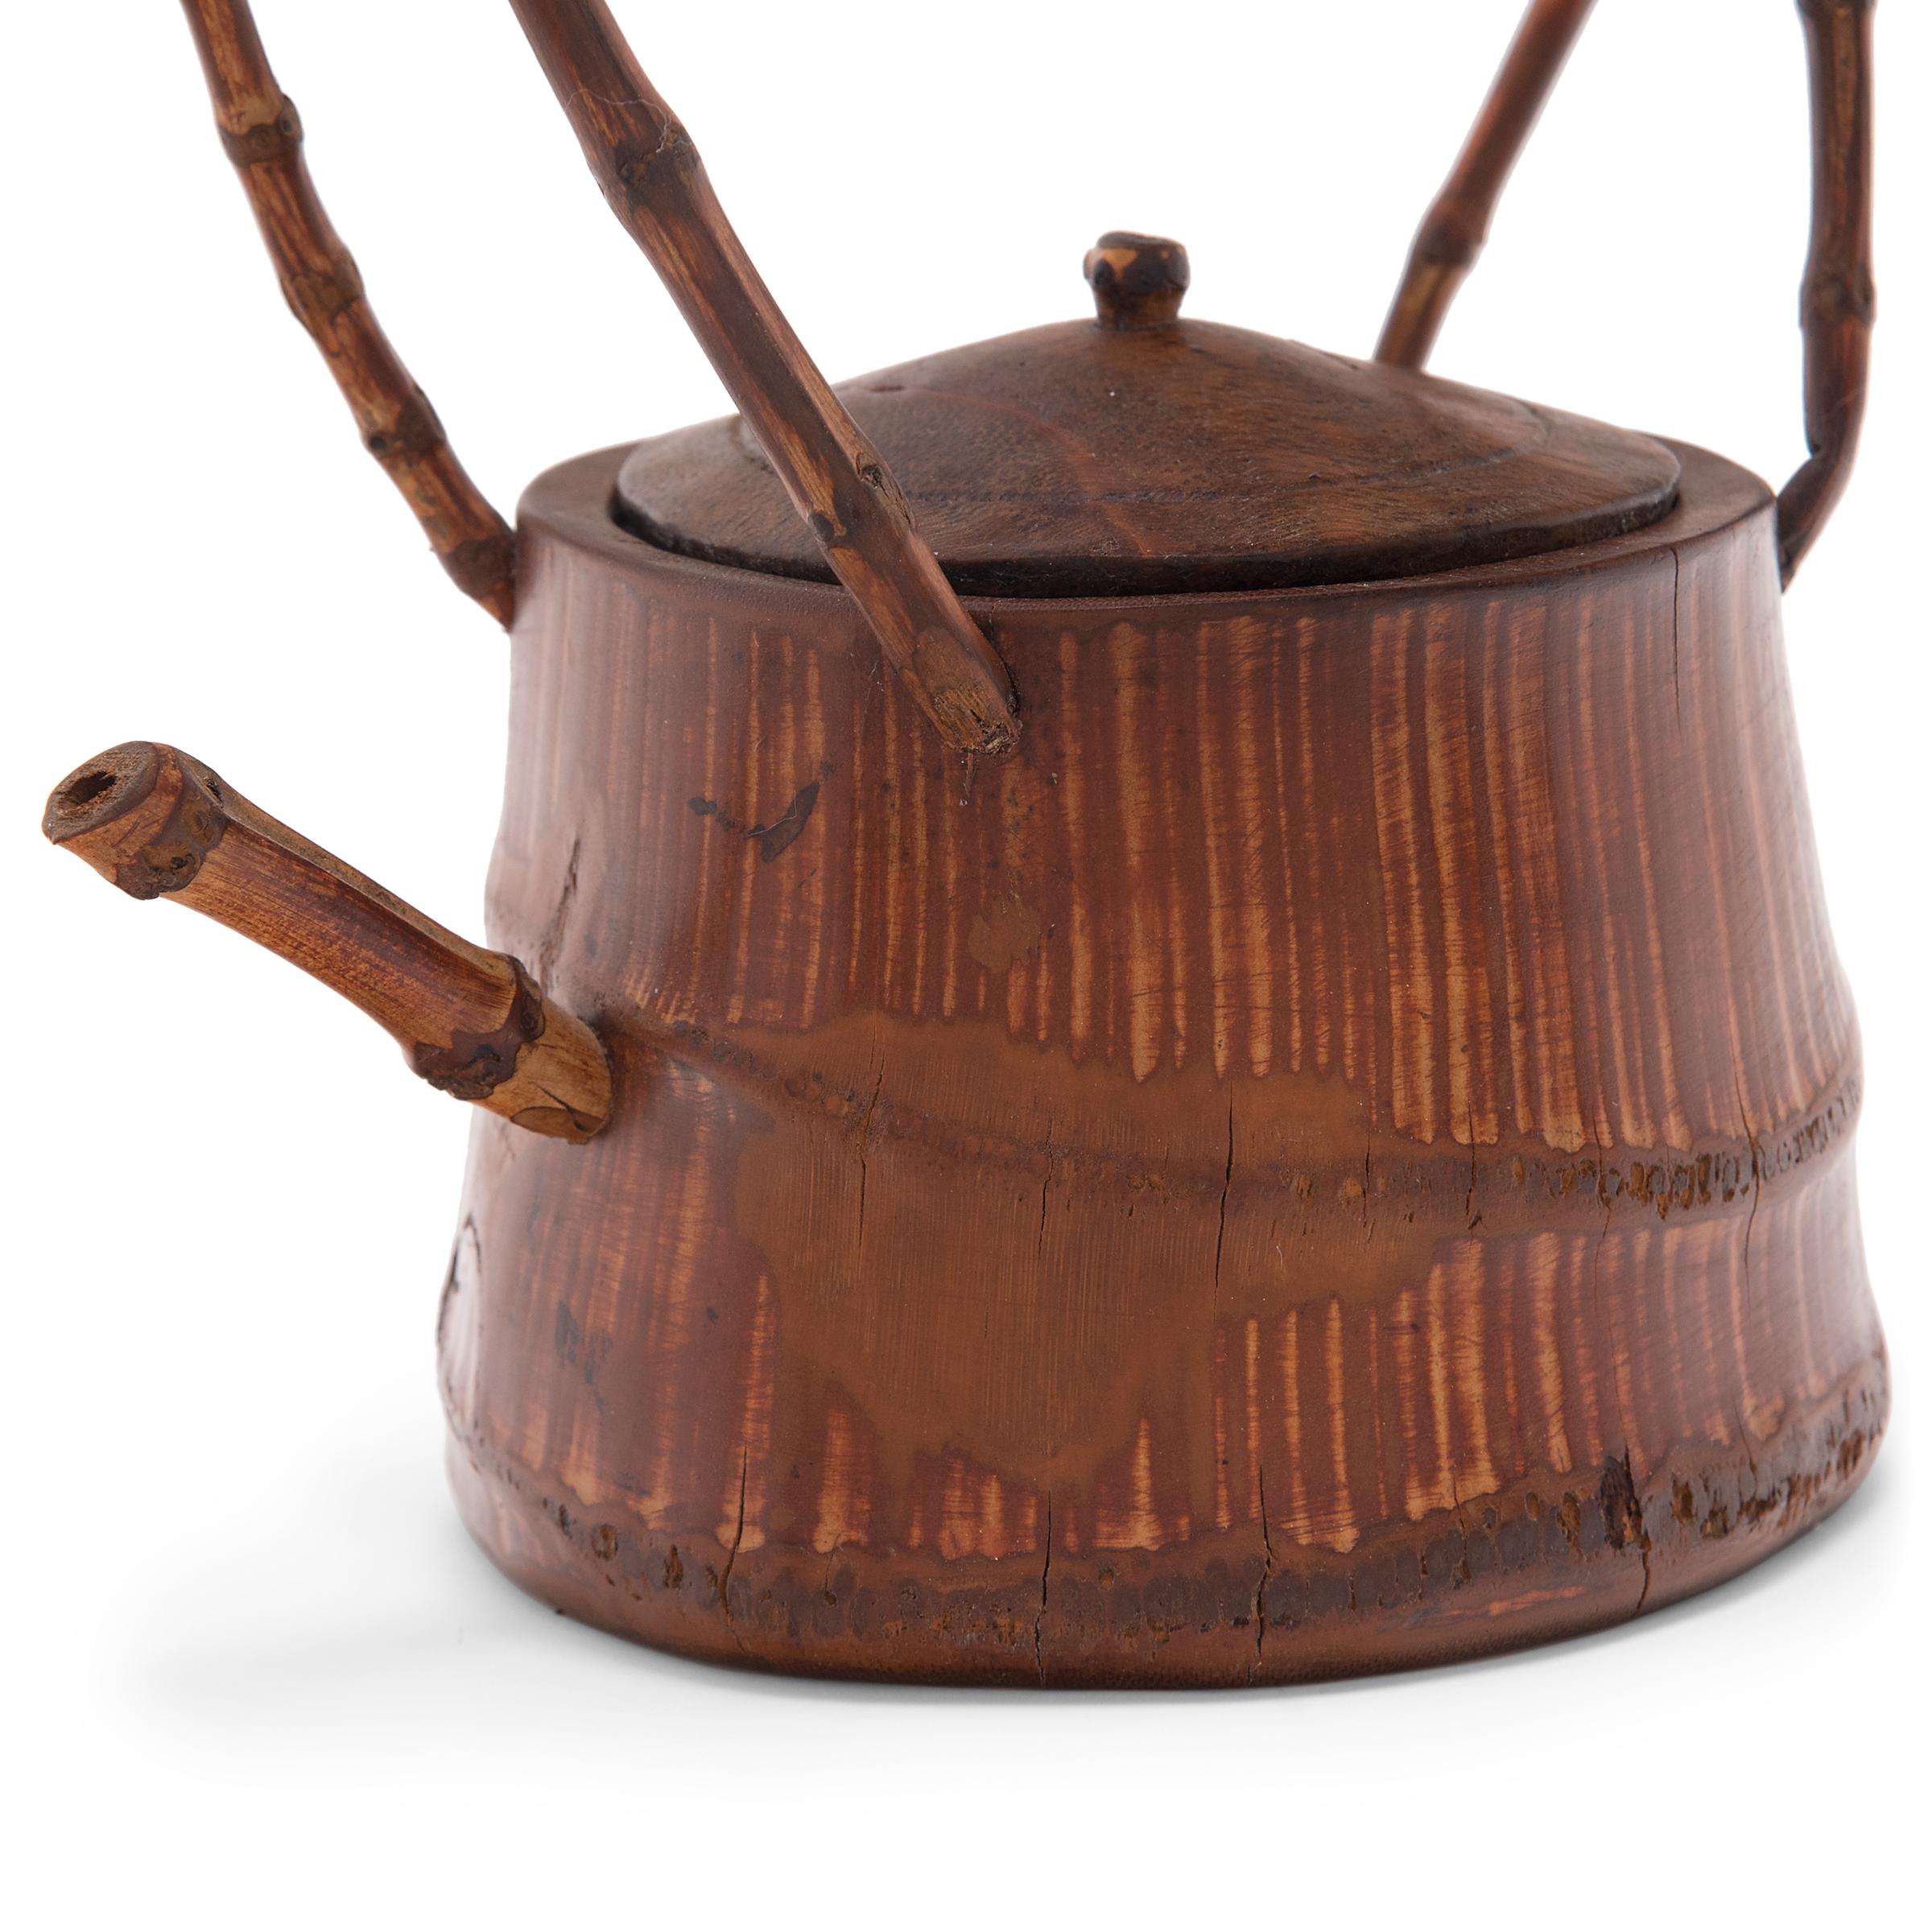 20th Century Chinese Bamboo Teapot with Arched Handle, c. 1900